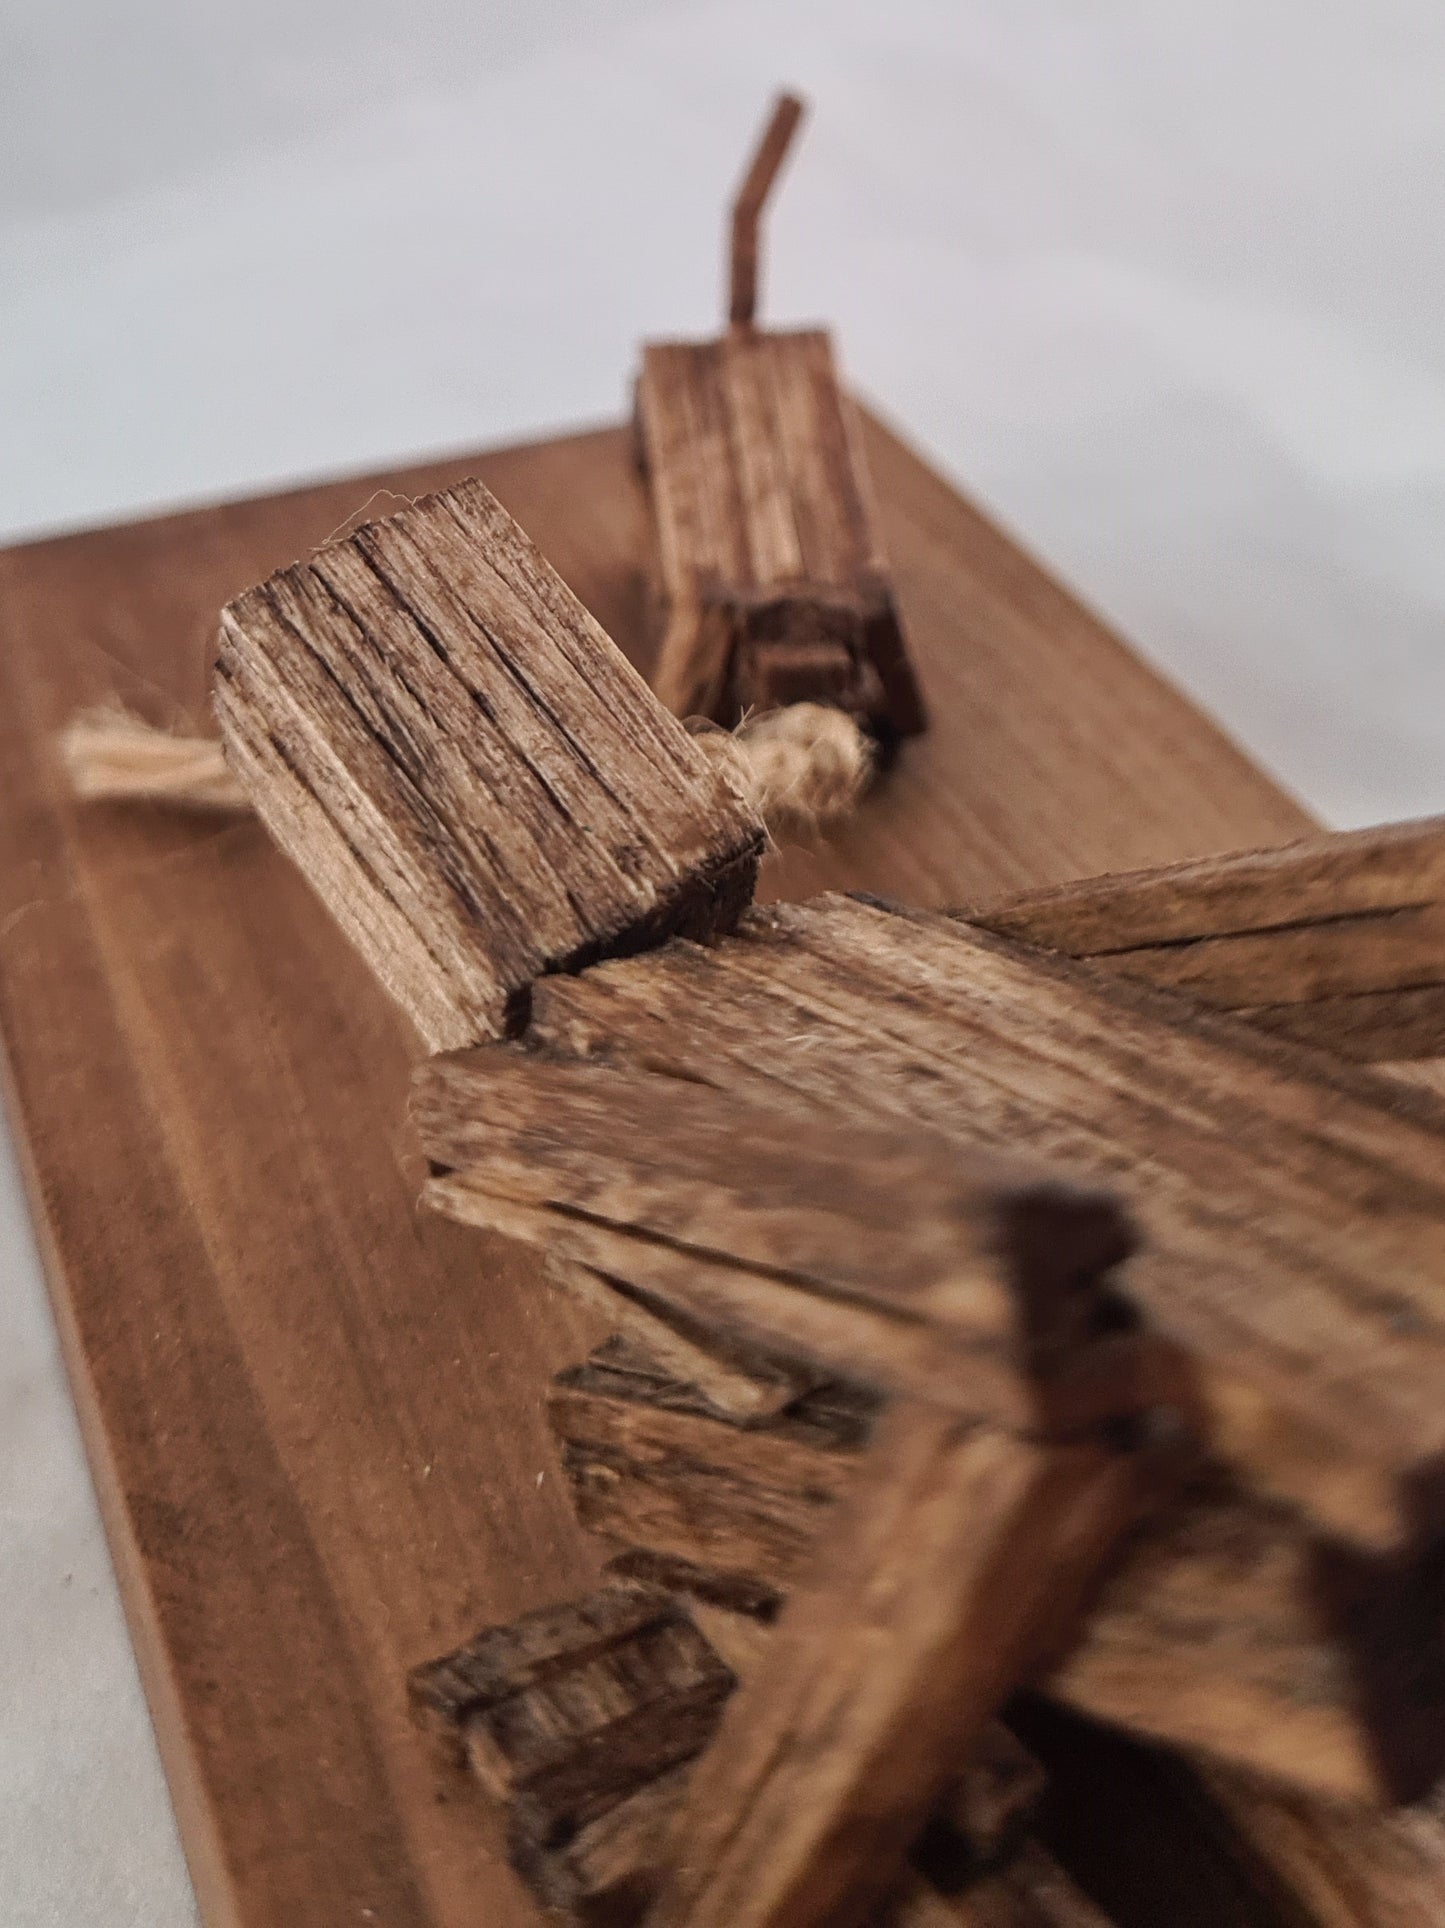 Tug Of War - Handcrafted Wooden Matchstick Figures - Gifts, Ornaments and Decor By Tiggidy Designs